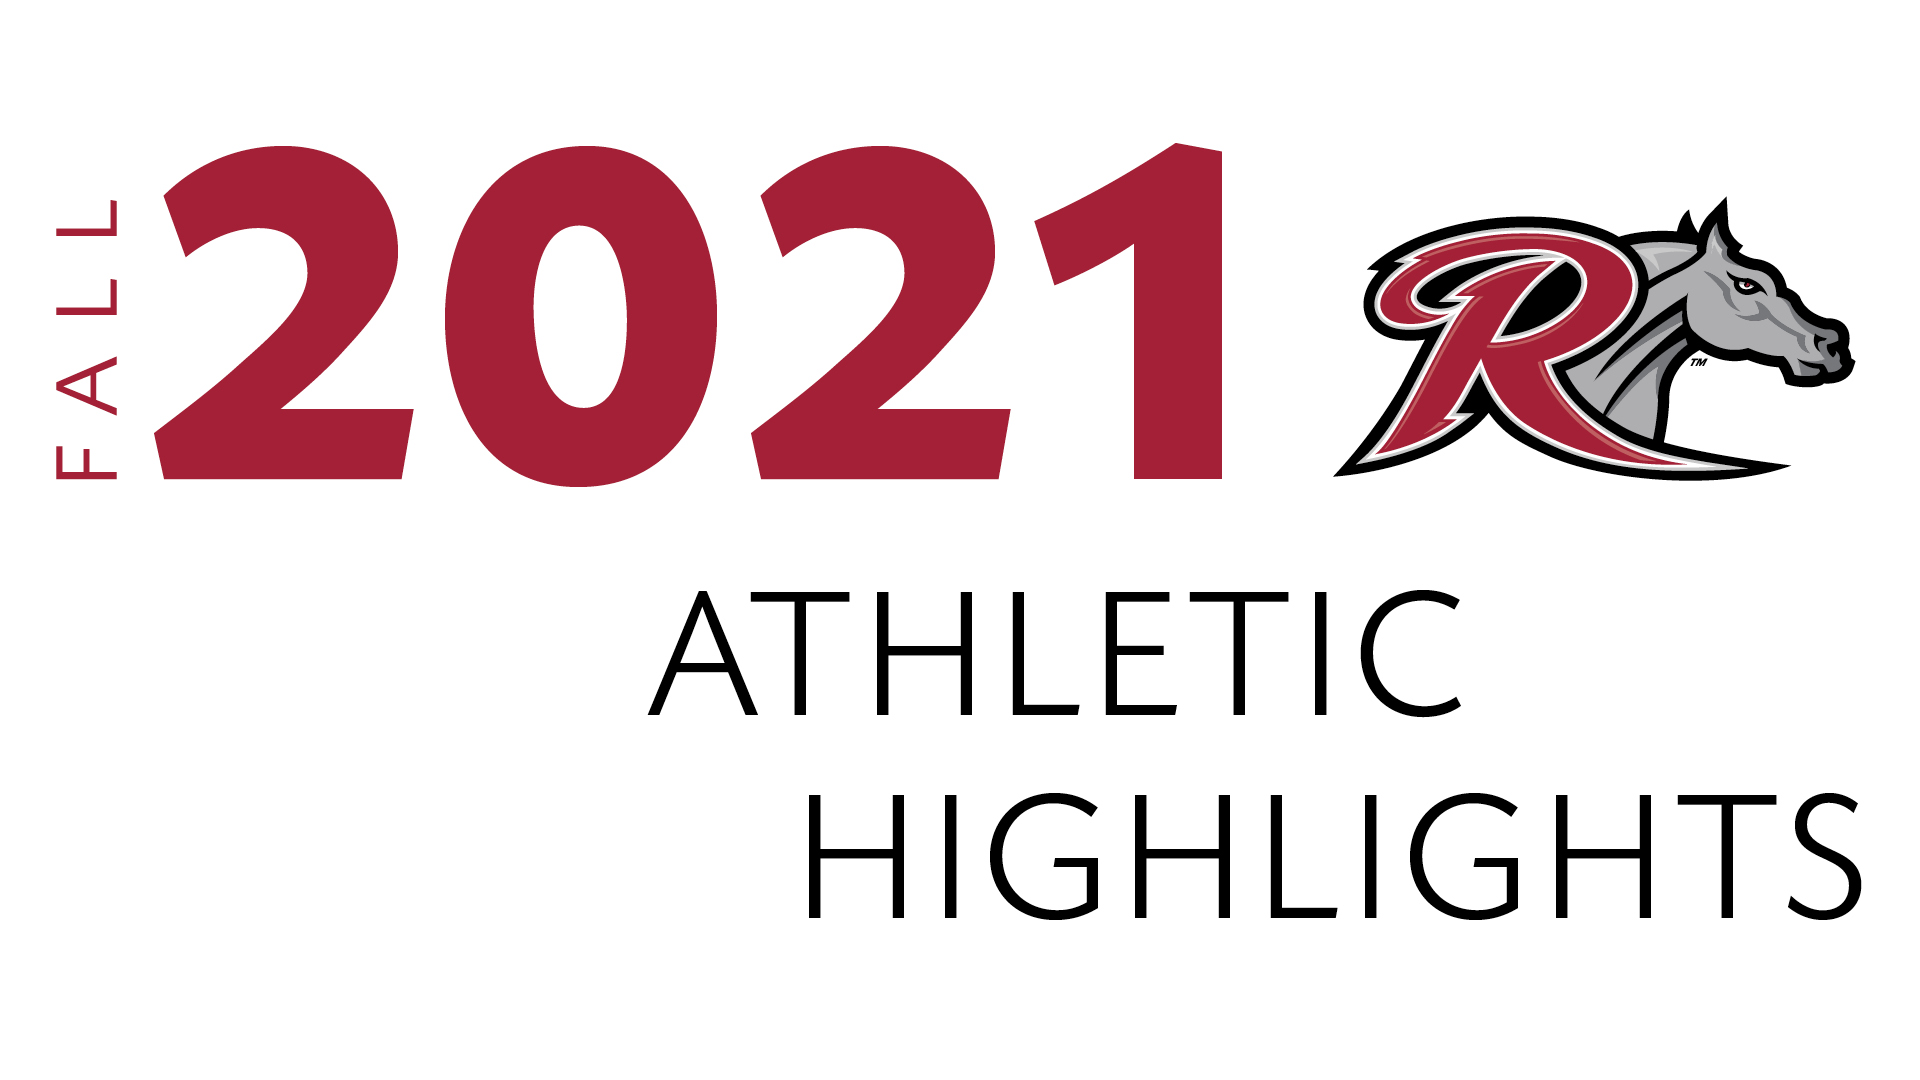 Fall 2021 athletic highlights